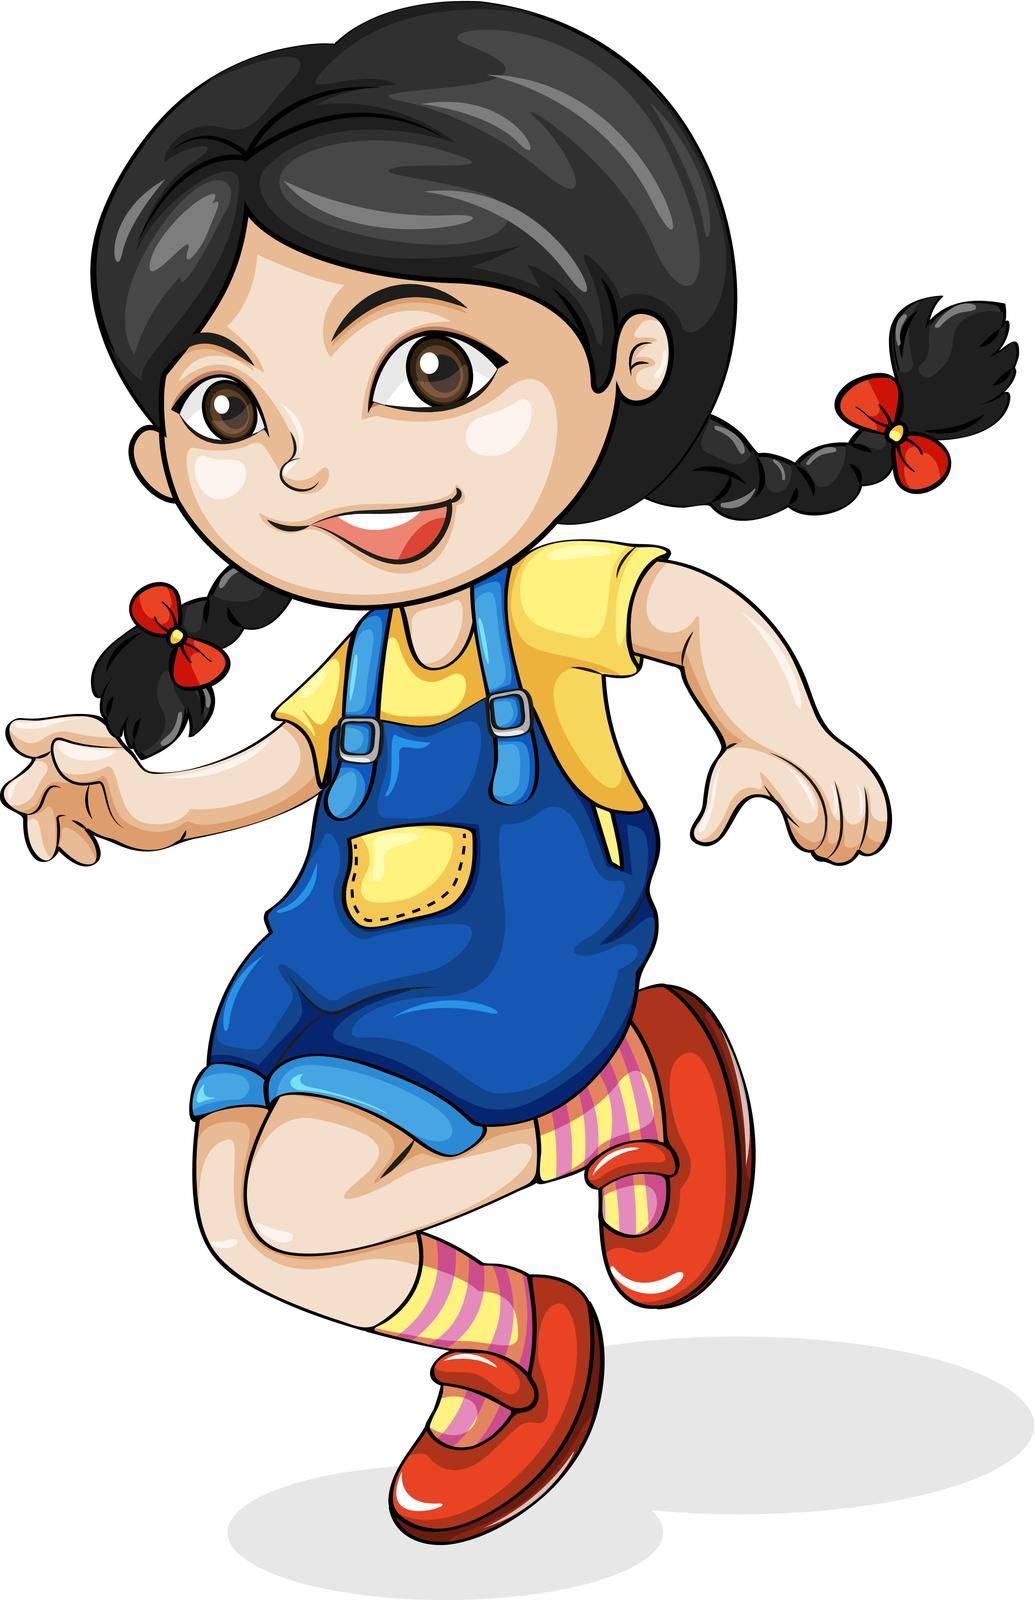 Illustration of a happy Asian girl dancing on a white background